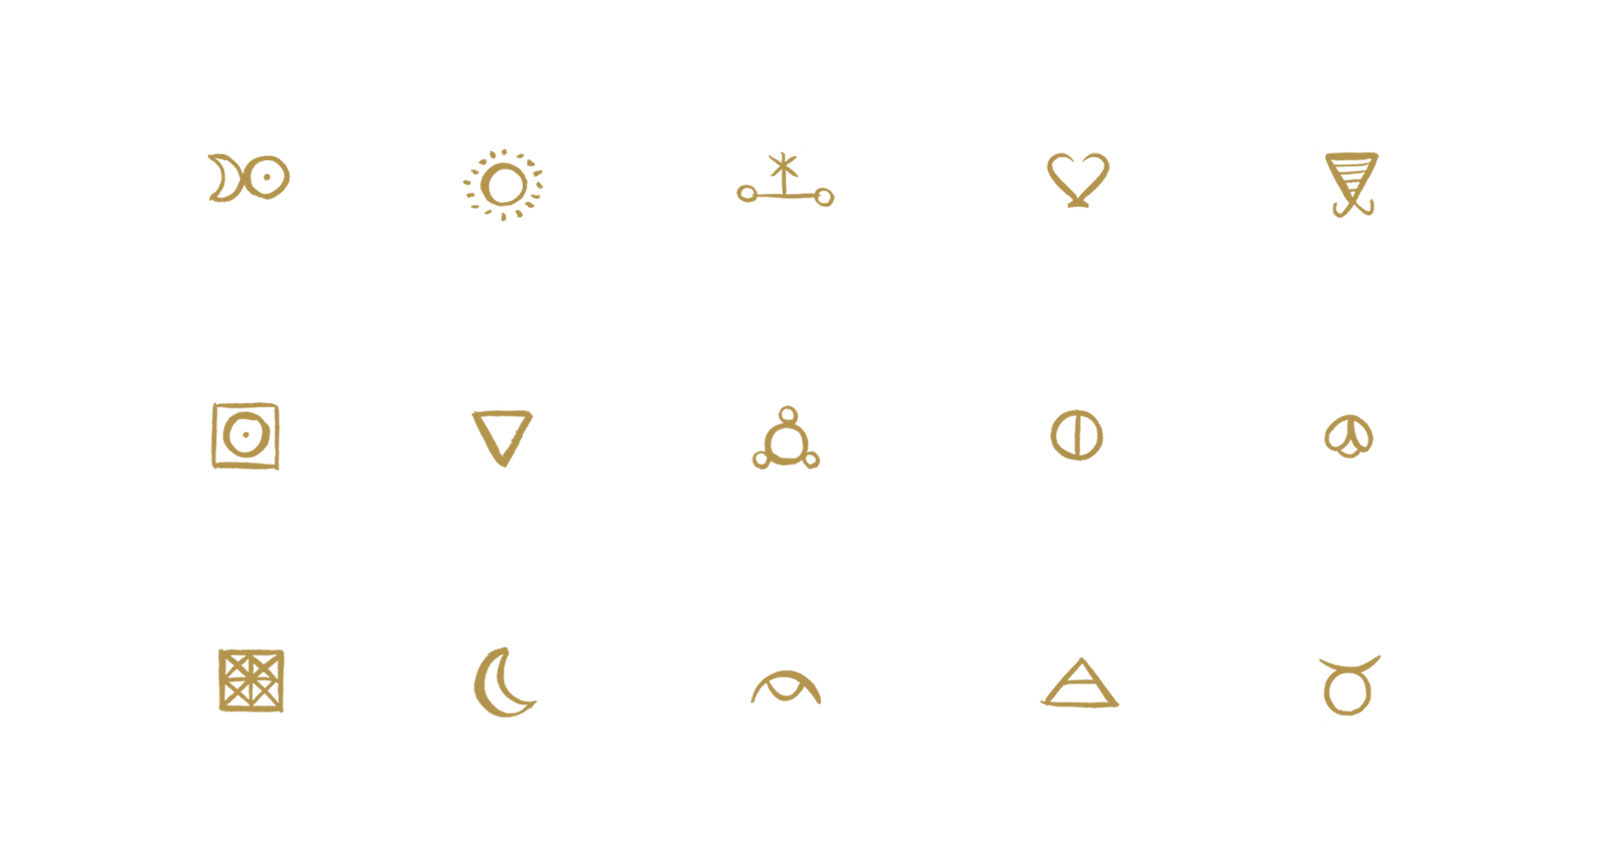 Hand-drawn icons inspired by alchemical symbols in gold, created for KYPRIS.